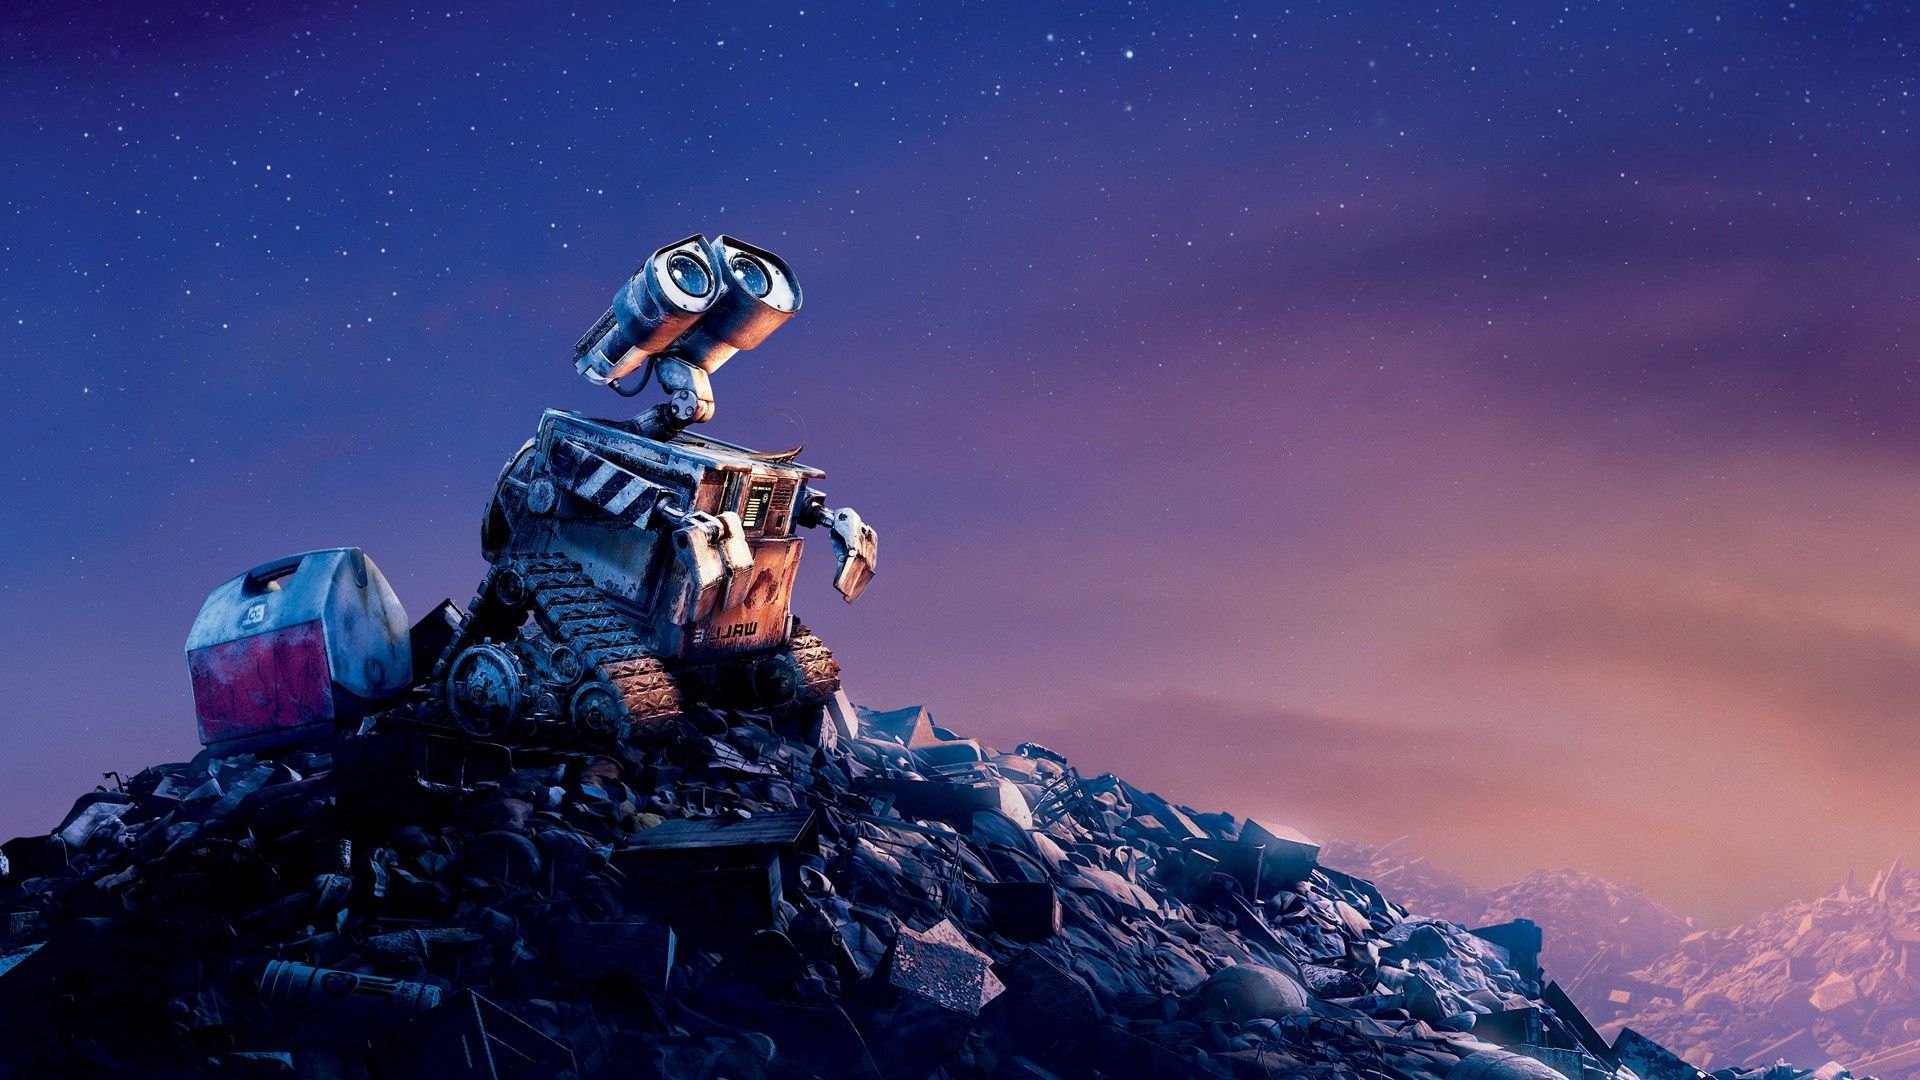 Walle android wallpaper gallery Wall e